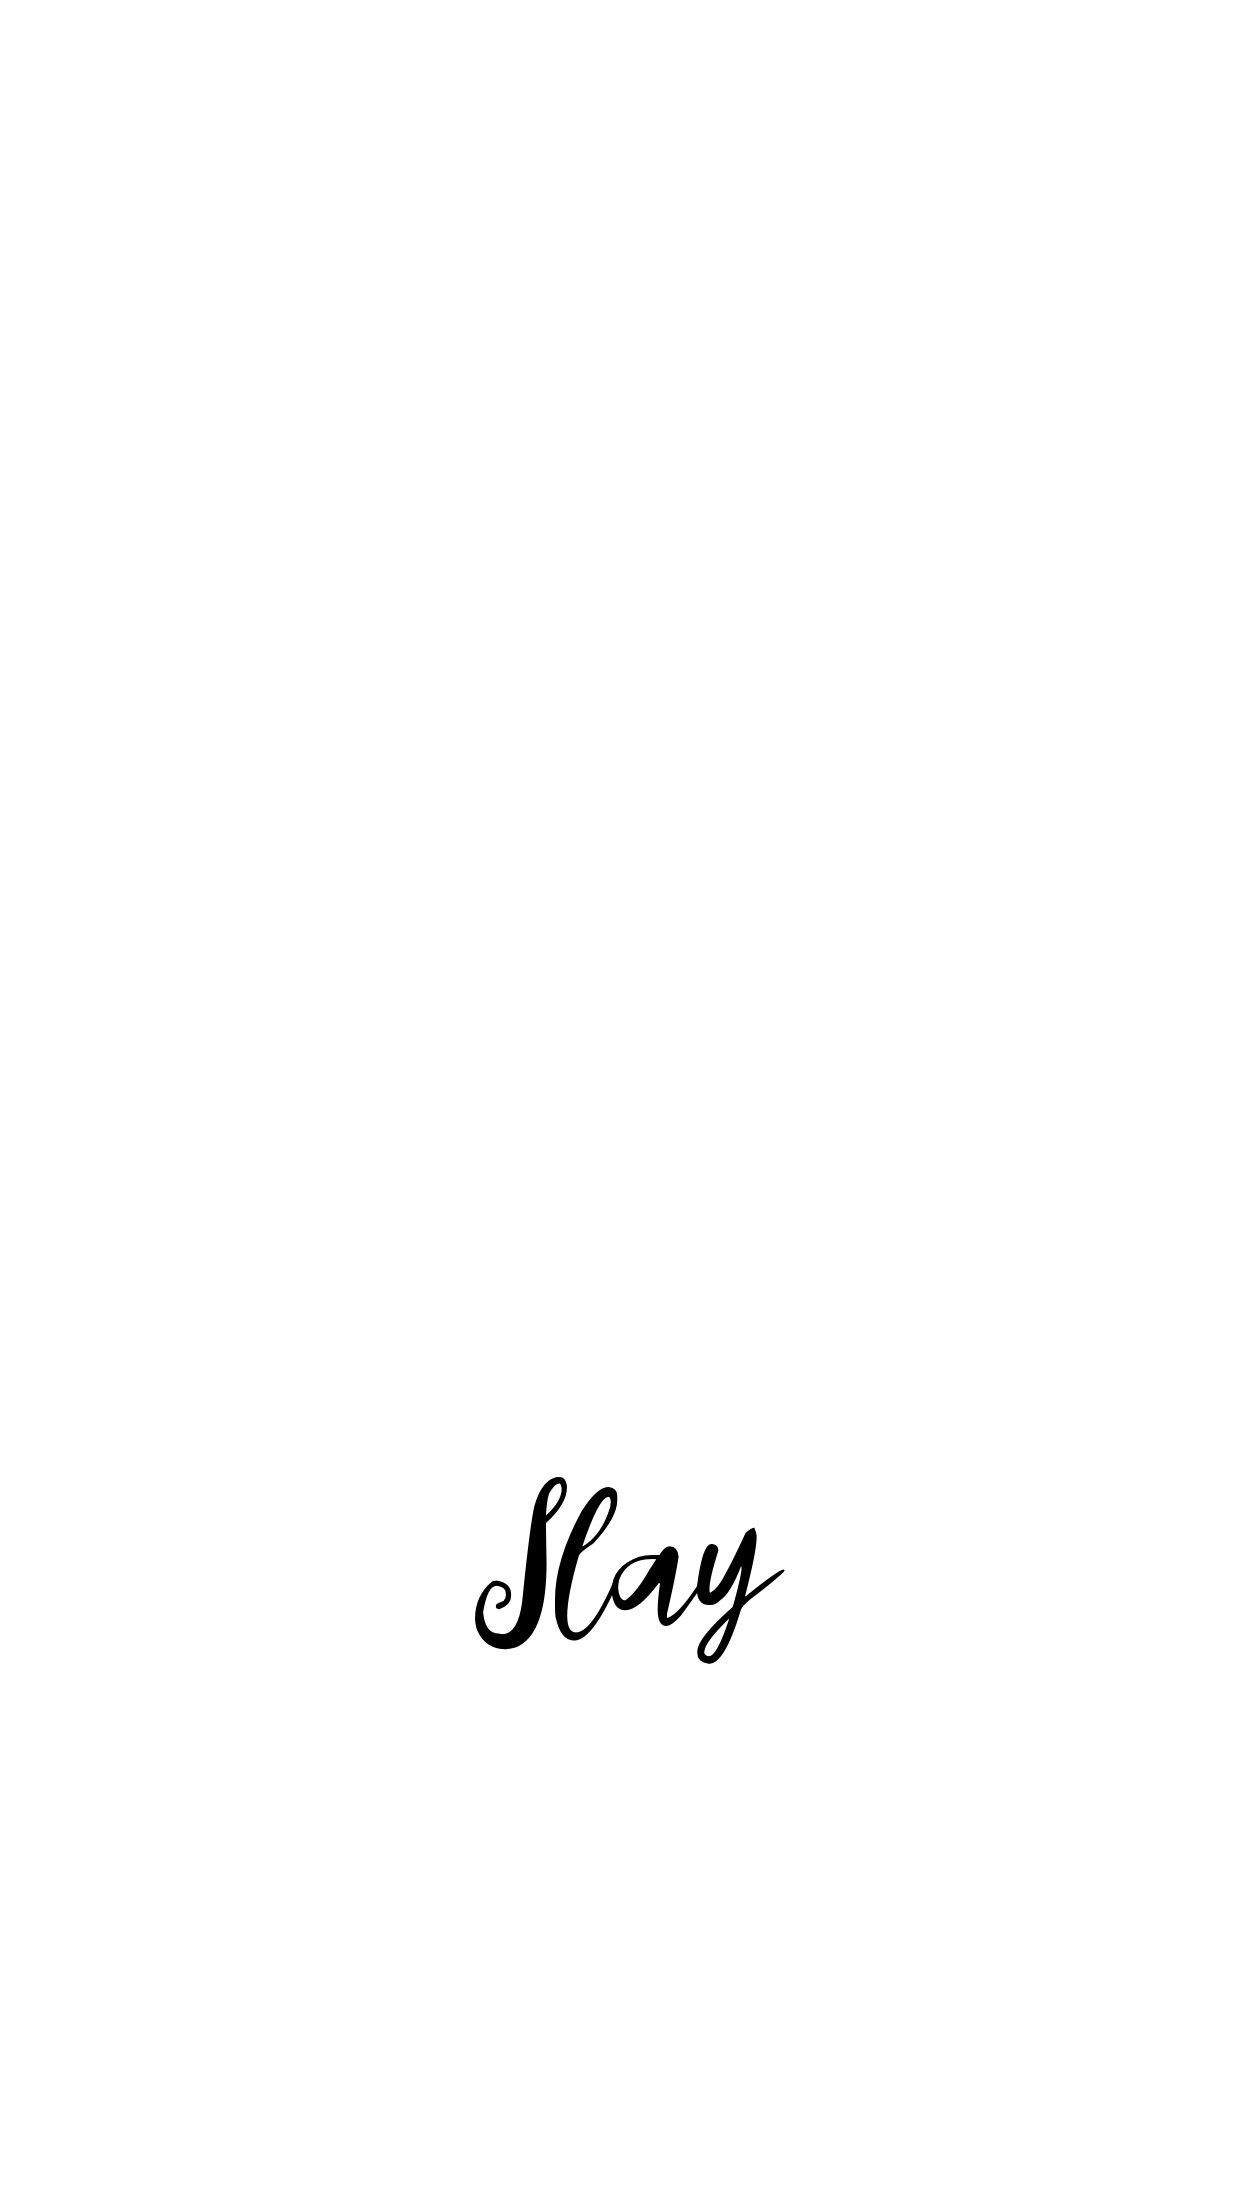 White Aesthetic Background For Mobile